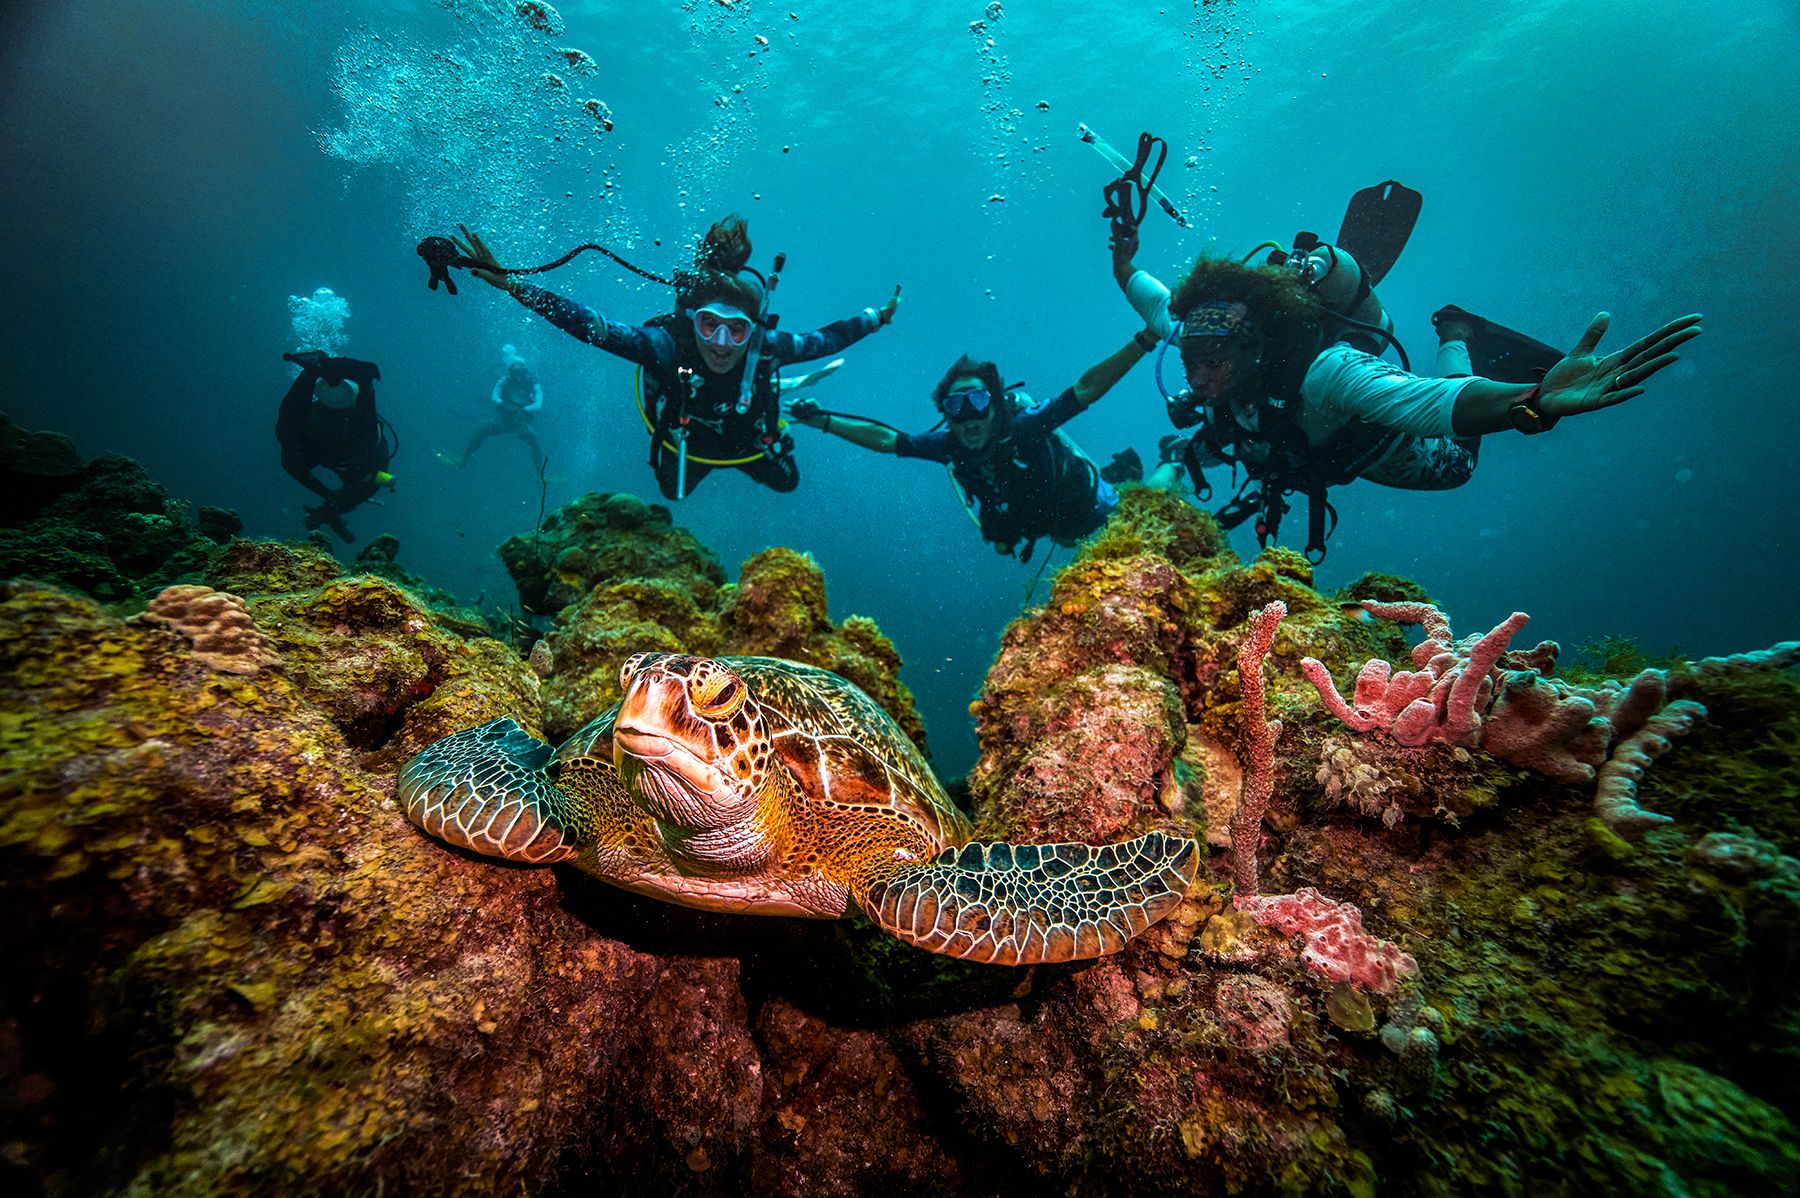 The Top Sandals Resorts & Destinations for the Ideal Scuba Diving Vacation